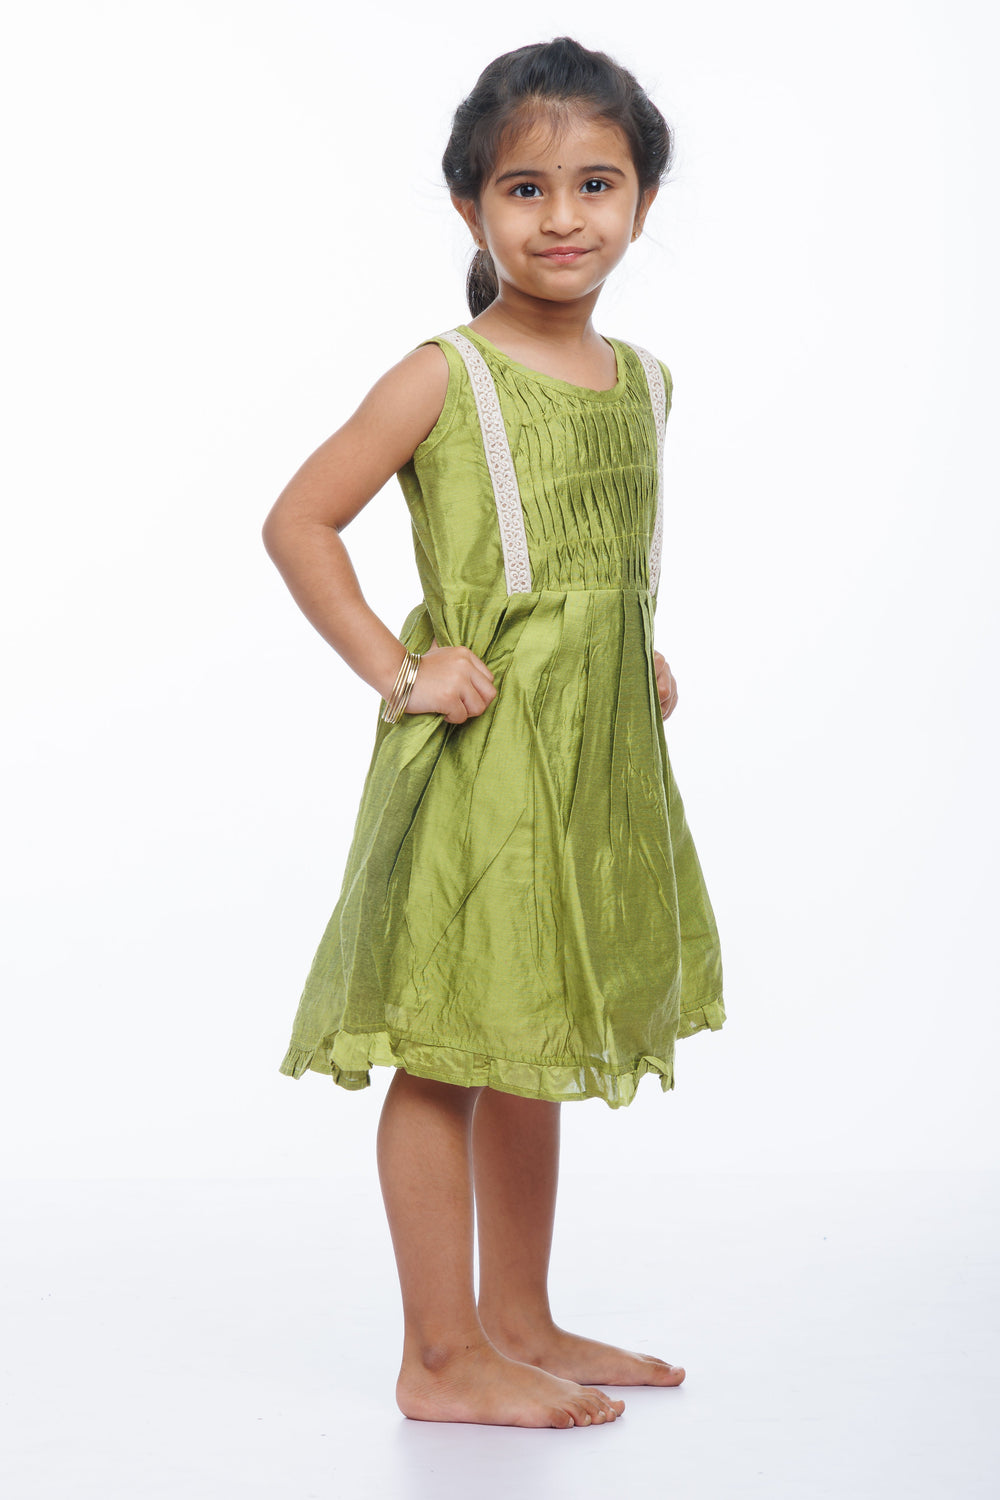 The Nesavu Girls Cotton Frock Girls' Lime Green Pleated Cotton Sundress with Lace Accents Nesavu Casual Lace-Trimmed Green Sundress for Girls | Everyday Summer Chic | The Nesavu